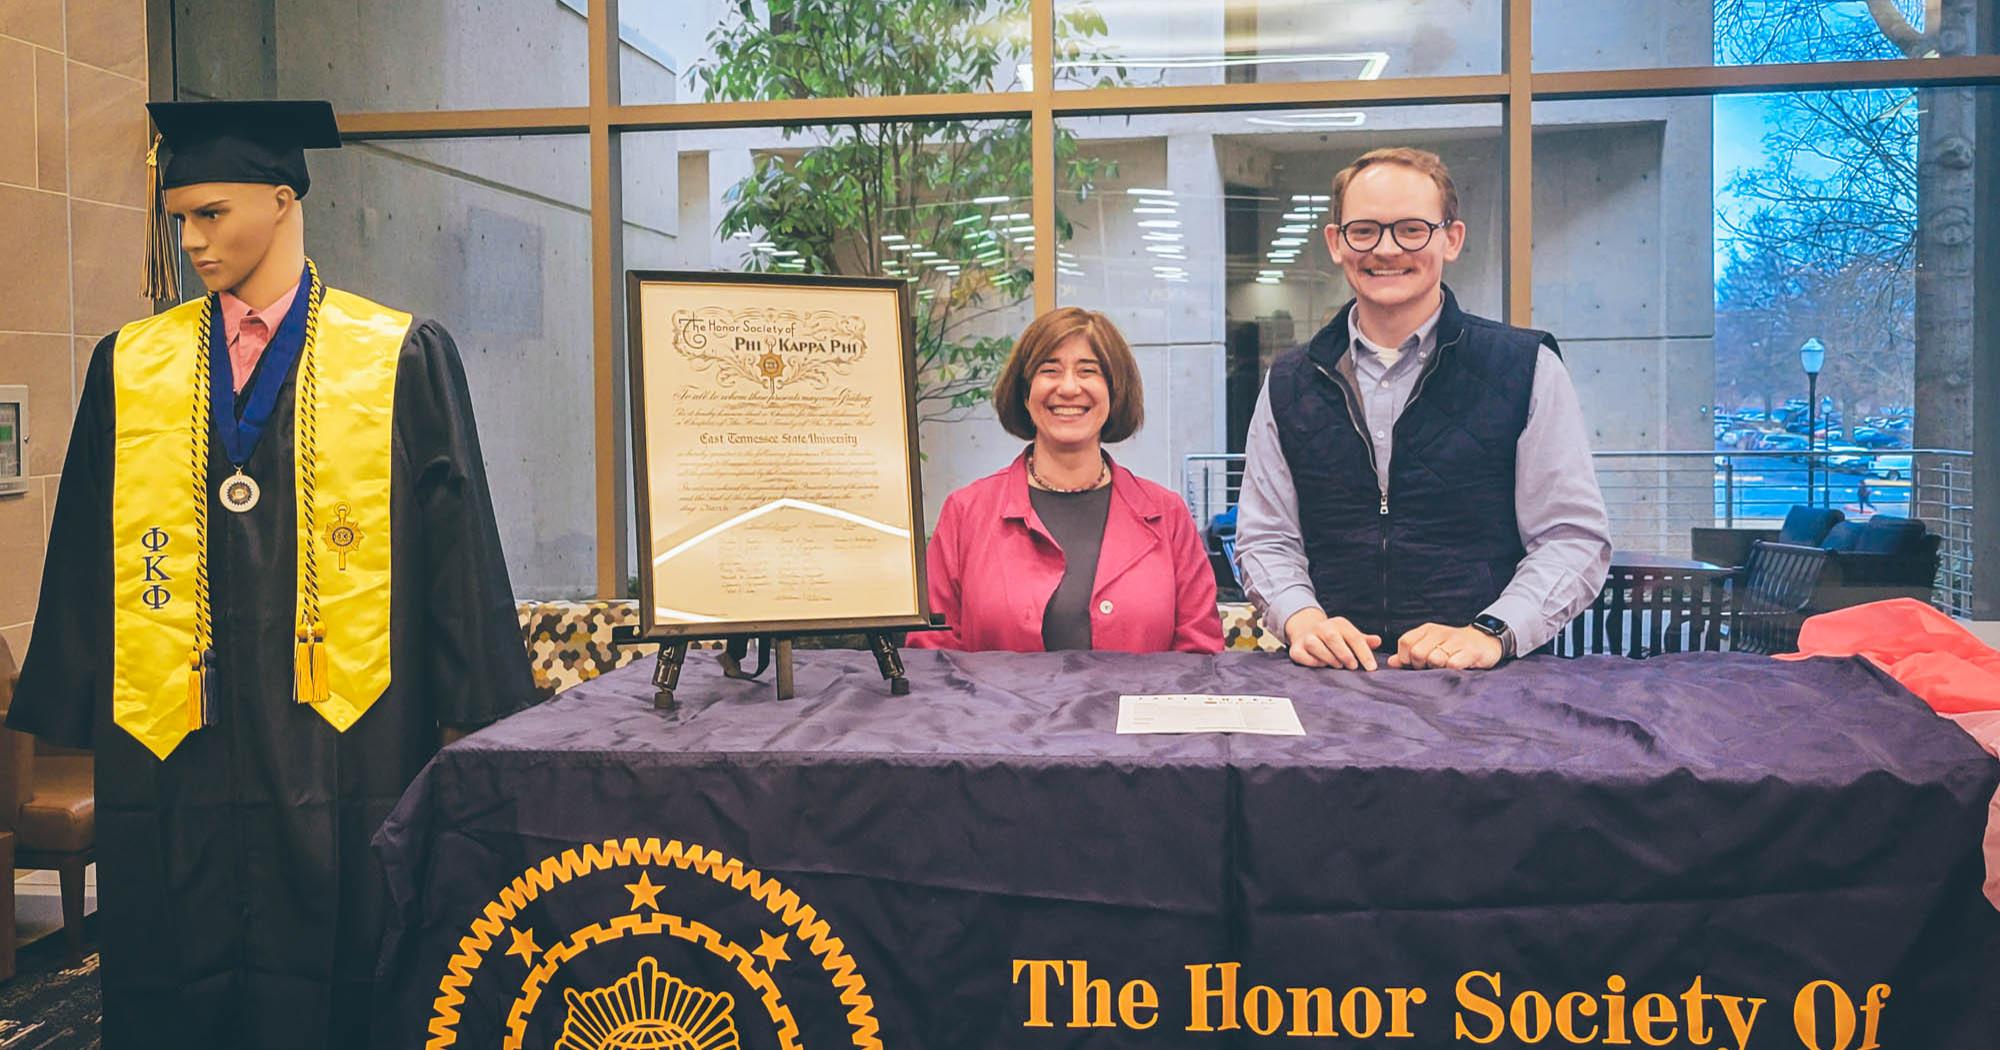 On the left, a mannequin adorned in Phi Kappa Phi regalia stands. The Phi Kappa Phi Honor Society table is visible, with two individuals standing behind the table smiling.